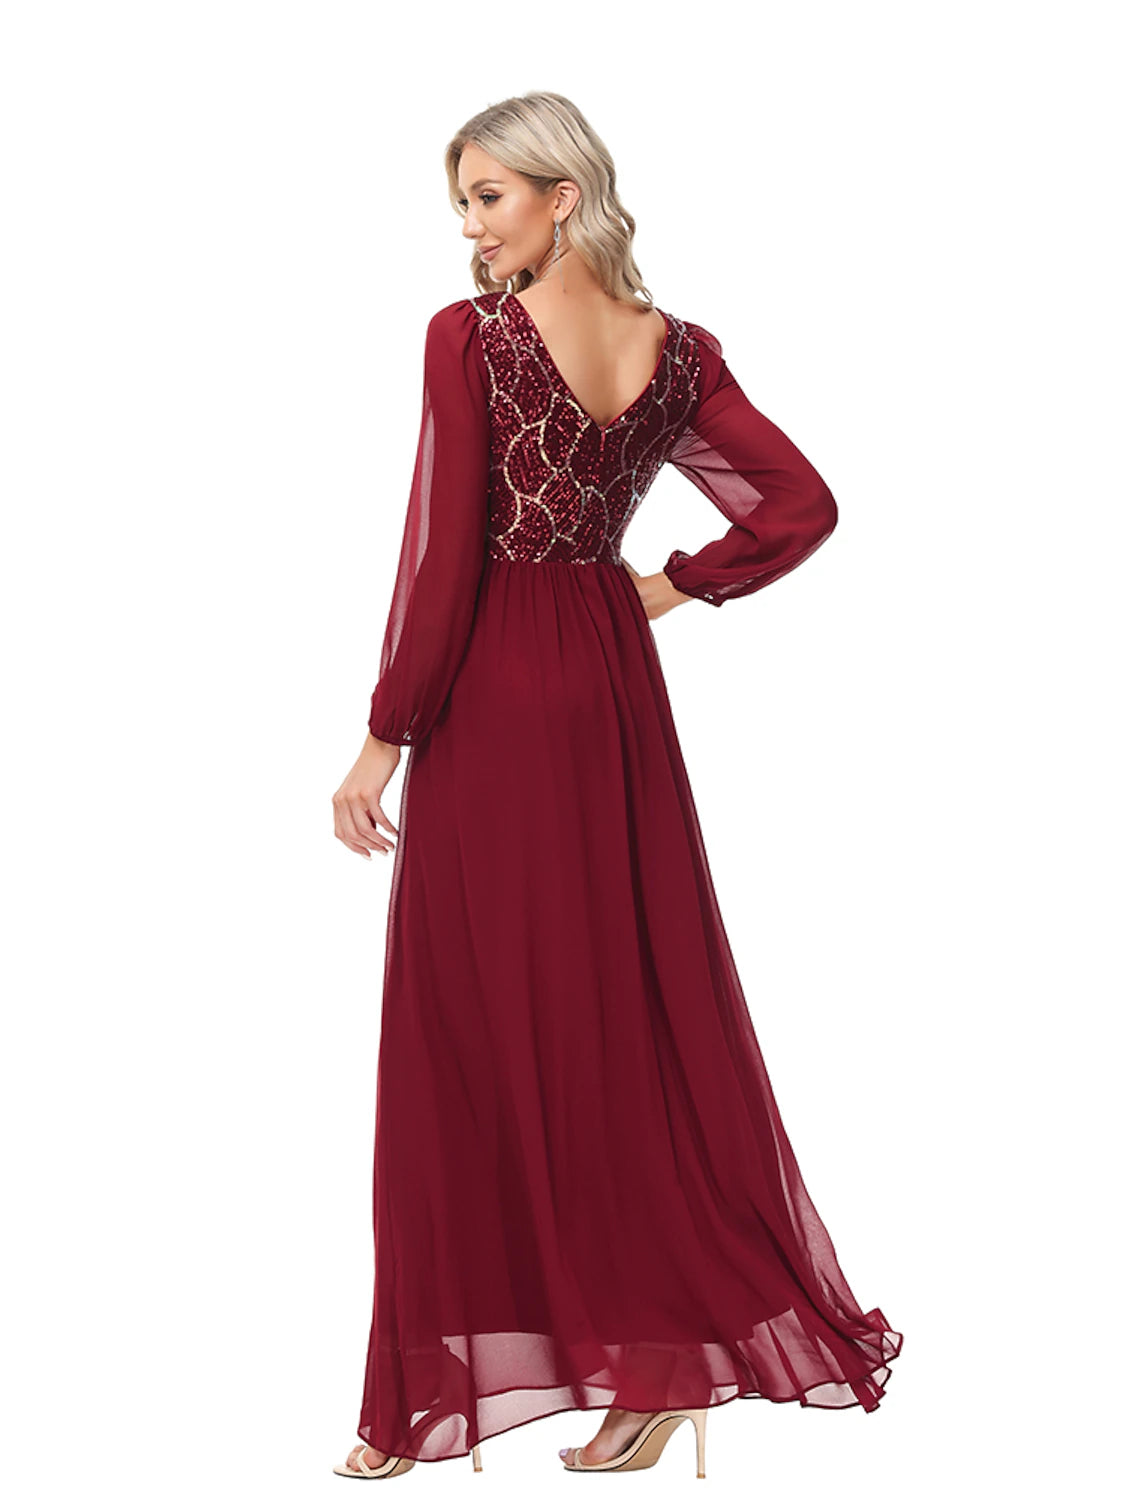 A-Line Evening Gown Empire Dress Party Wear Floor Length Long Sleeve Jewel Neck Chiffon V Back with Sequin Splicing